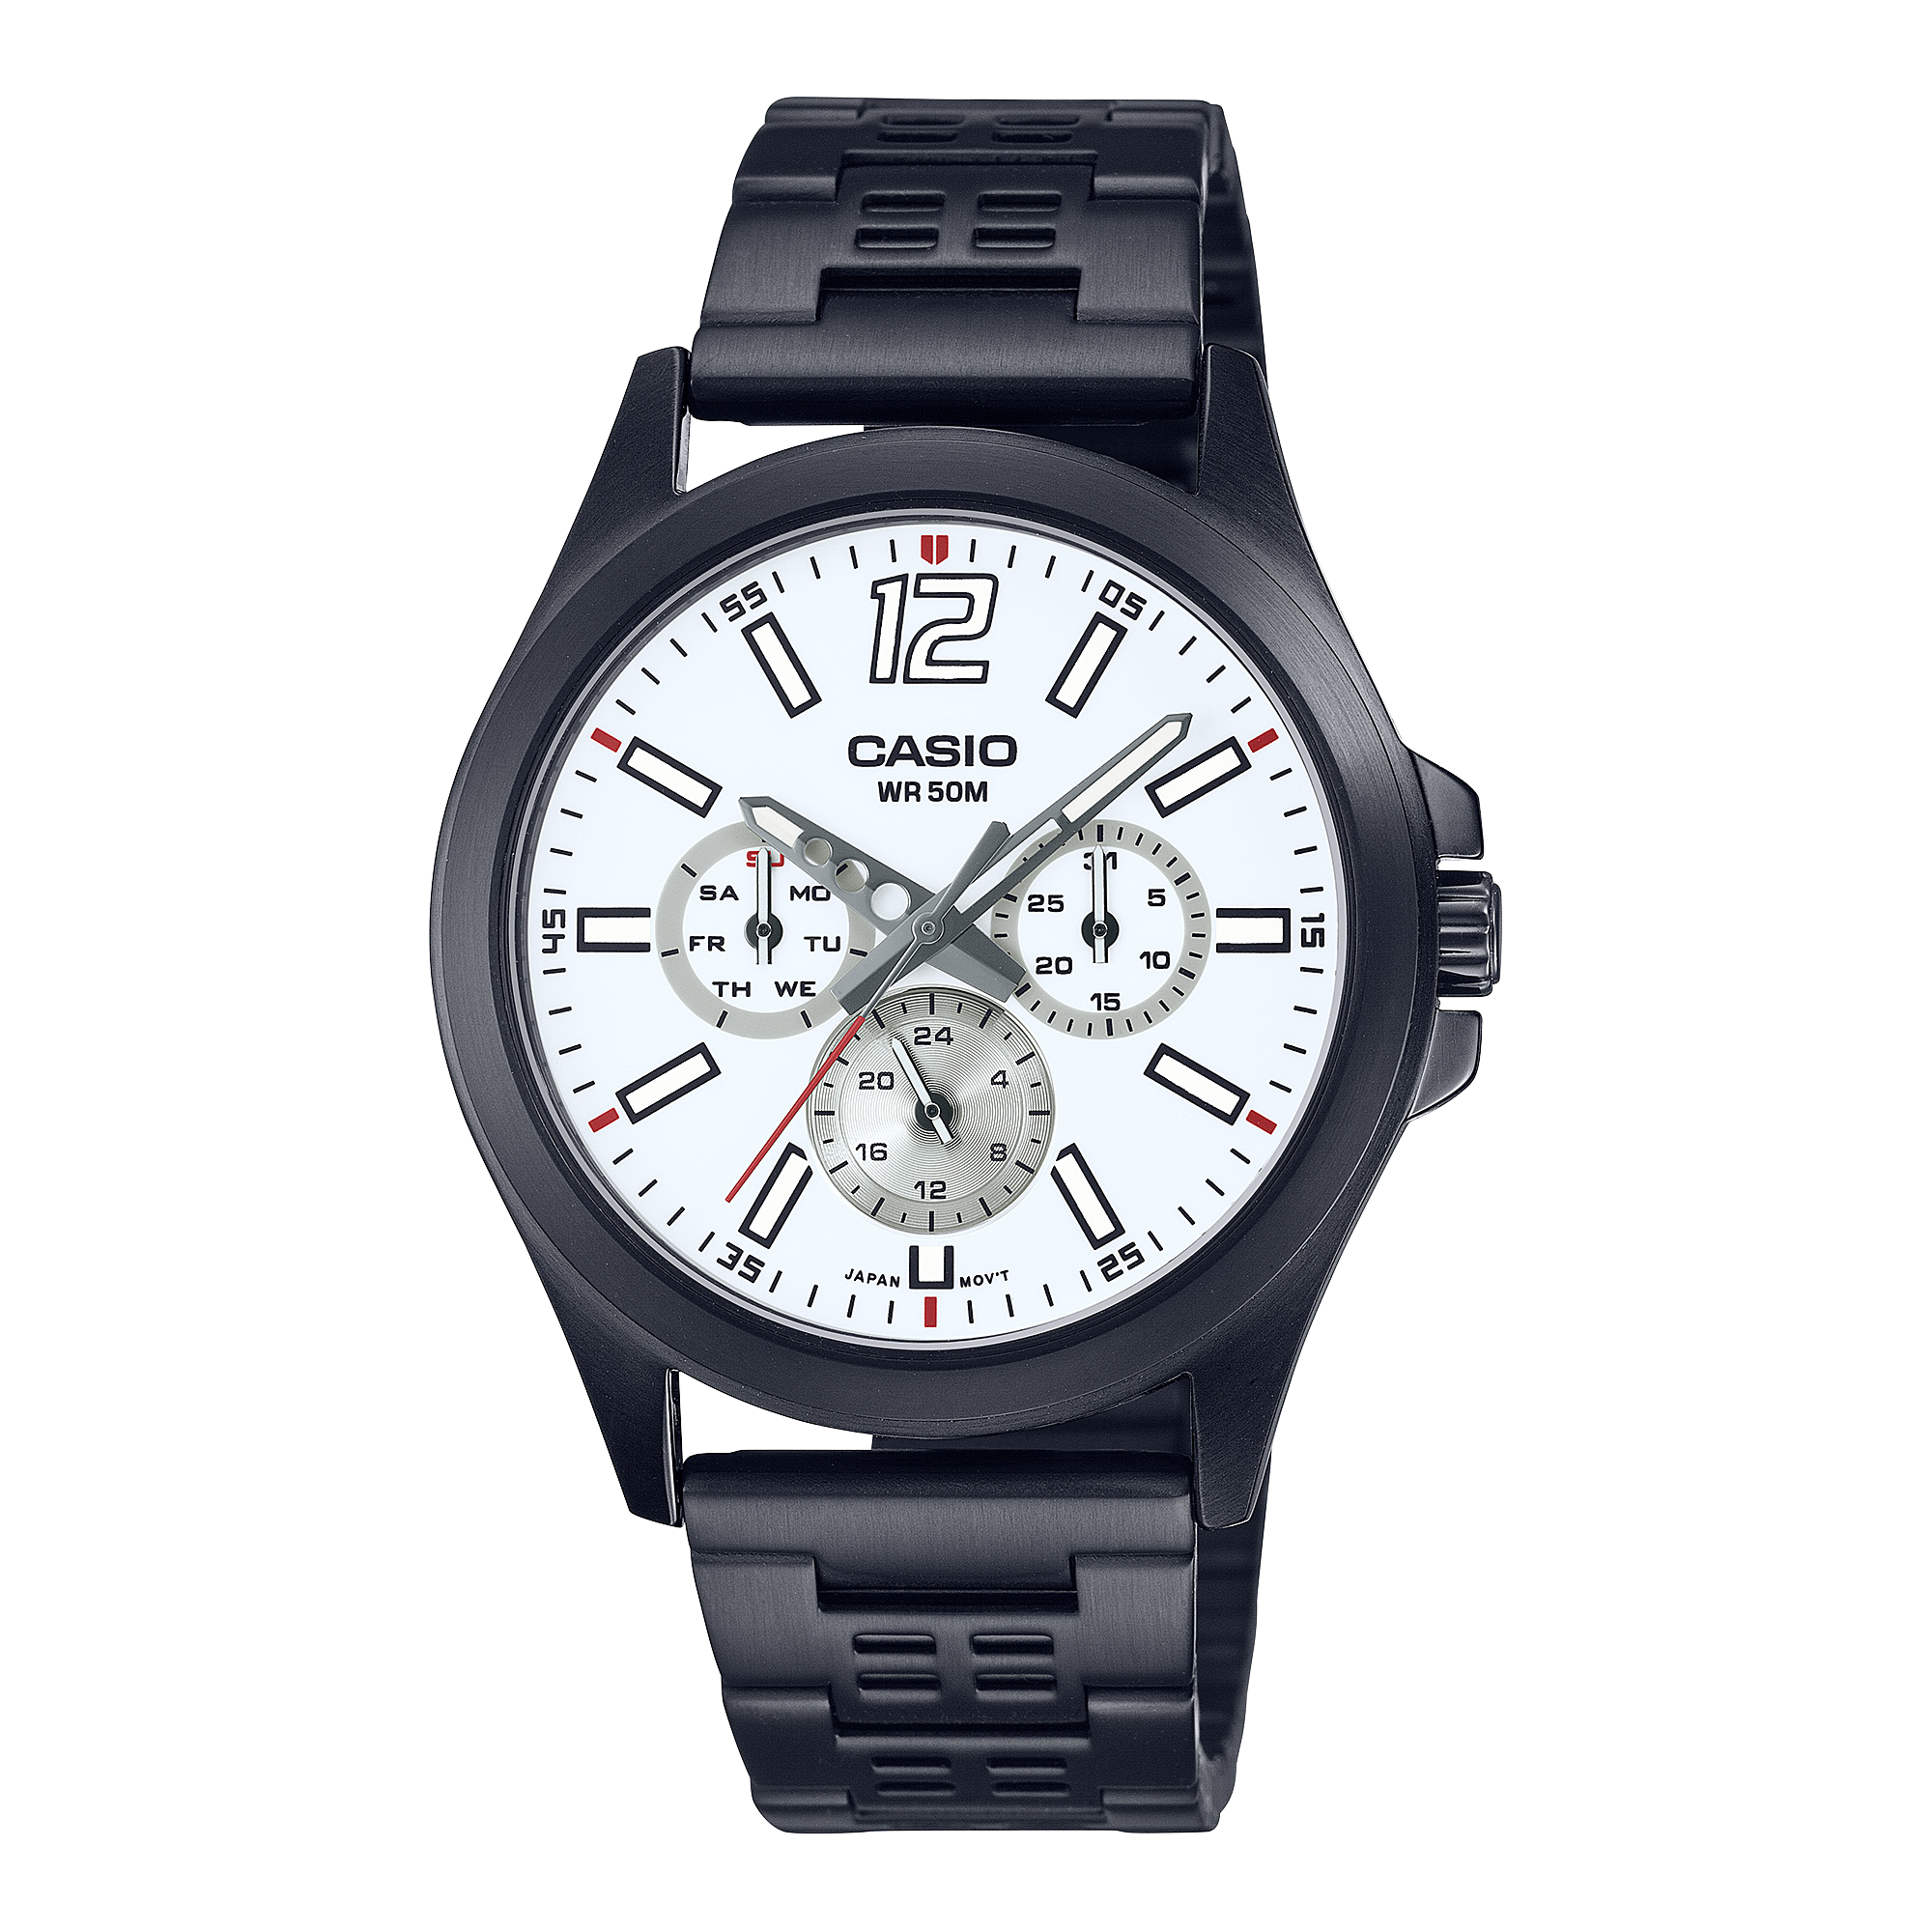 Casio Men's Watch - MTP-E350B-7BVDF | Stainless Steel | Water-Resistant | Quartz Movement | Sleek Men's | Fashionable |  Formal And Casual Wear | Timeless Design | Halabh